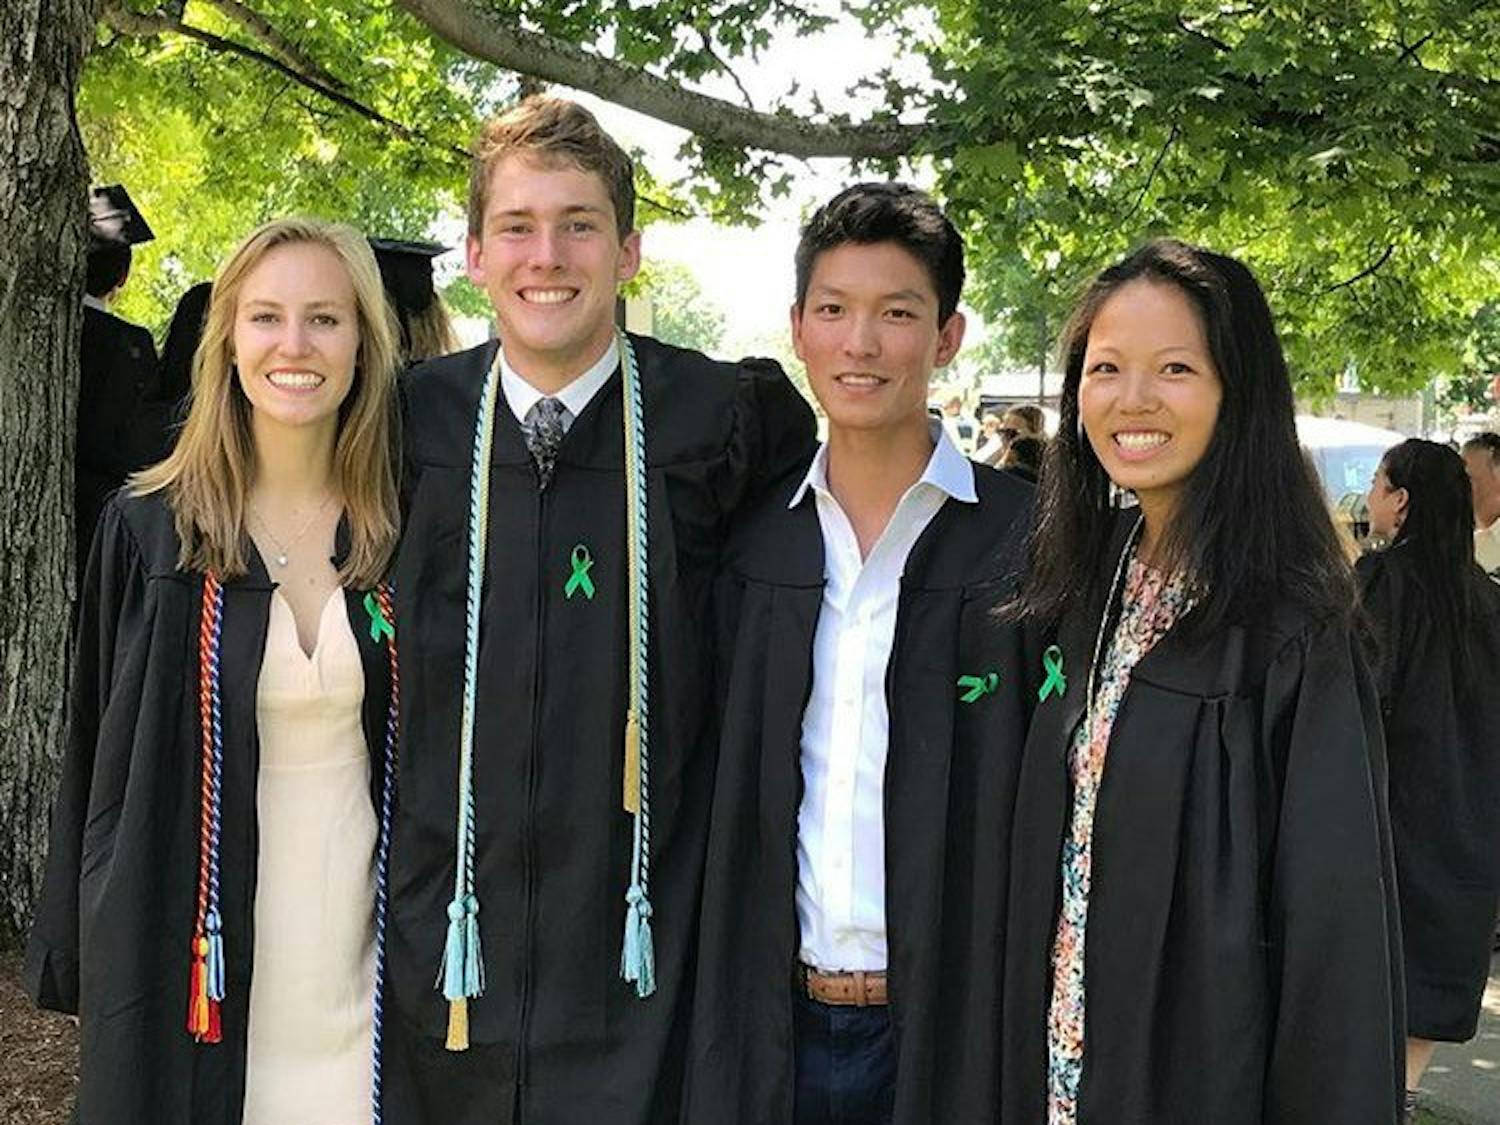 Terence Hughes&nbsp;'17 (second from left) graduated from Dartmouth this June and is currently working in Boston.